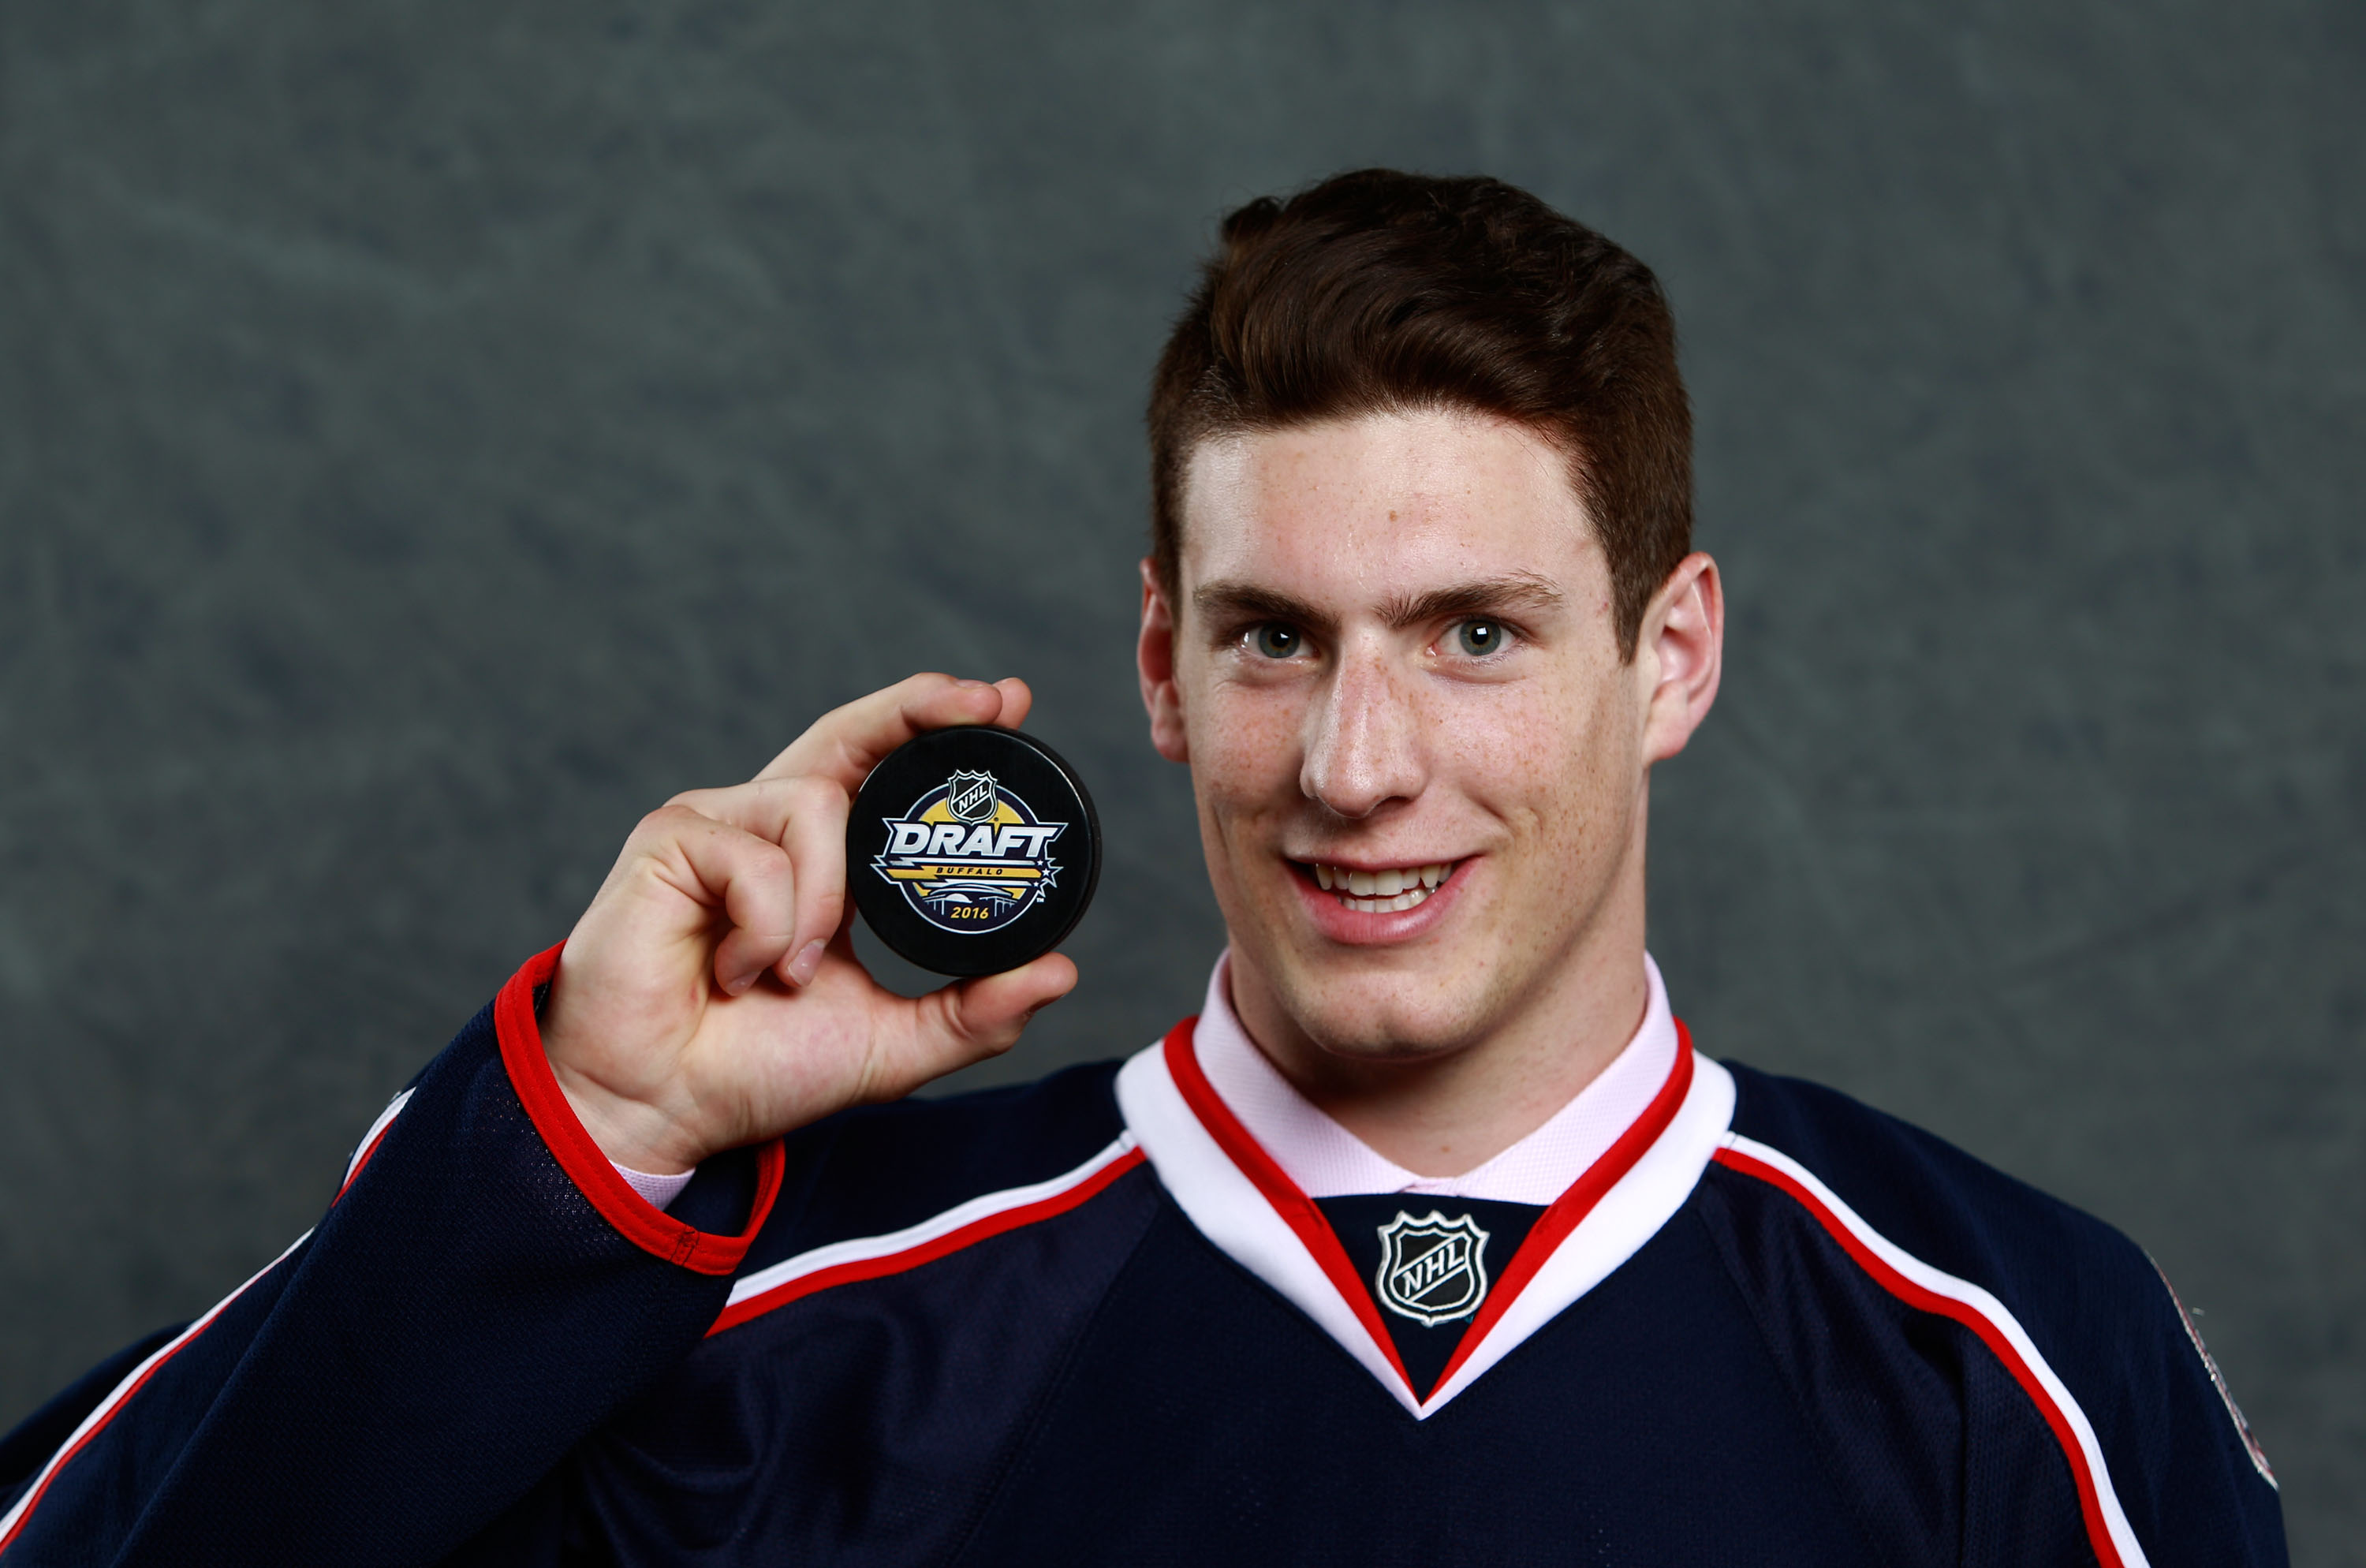 In appreciation of Pierre-Luc Dubois, the Blue Jackets' unheralded rookie